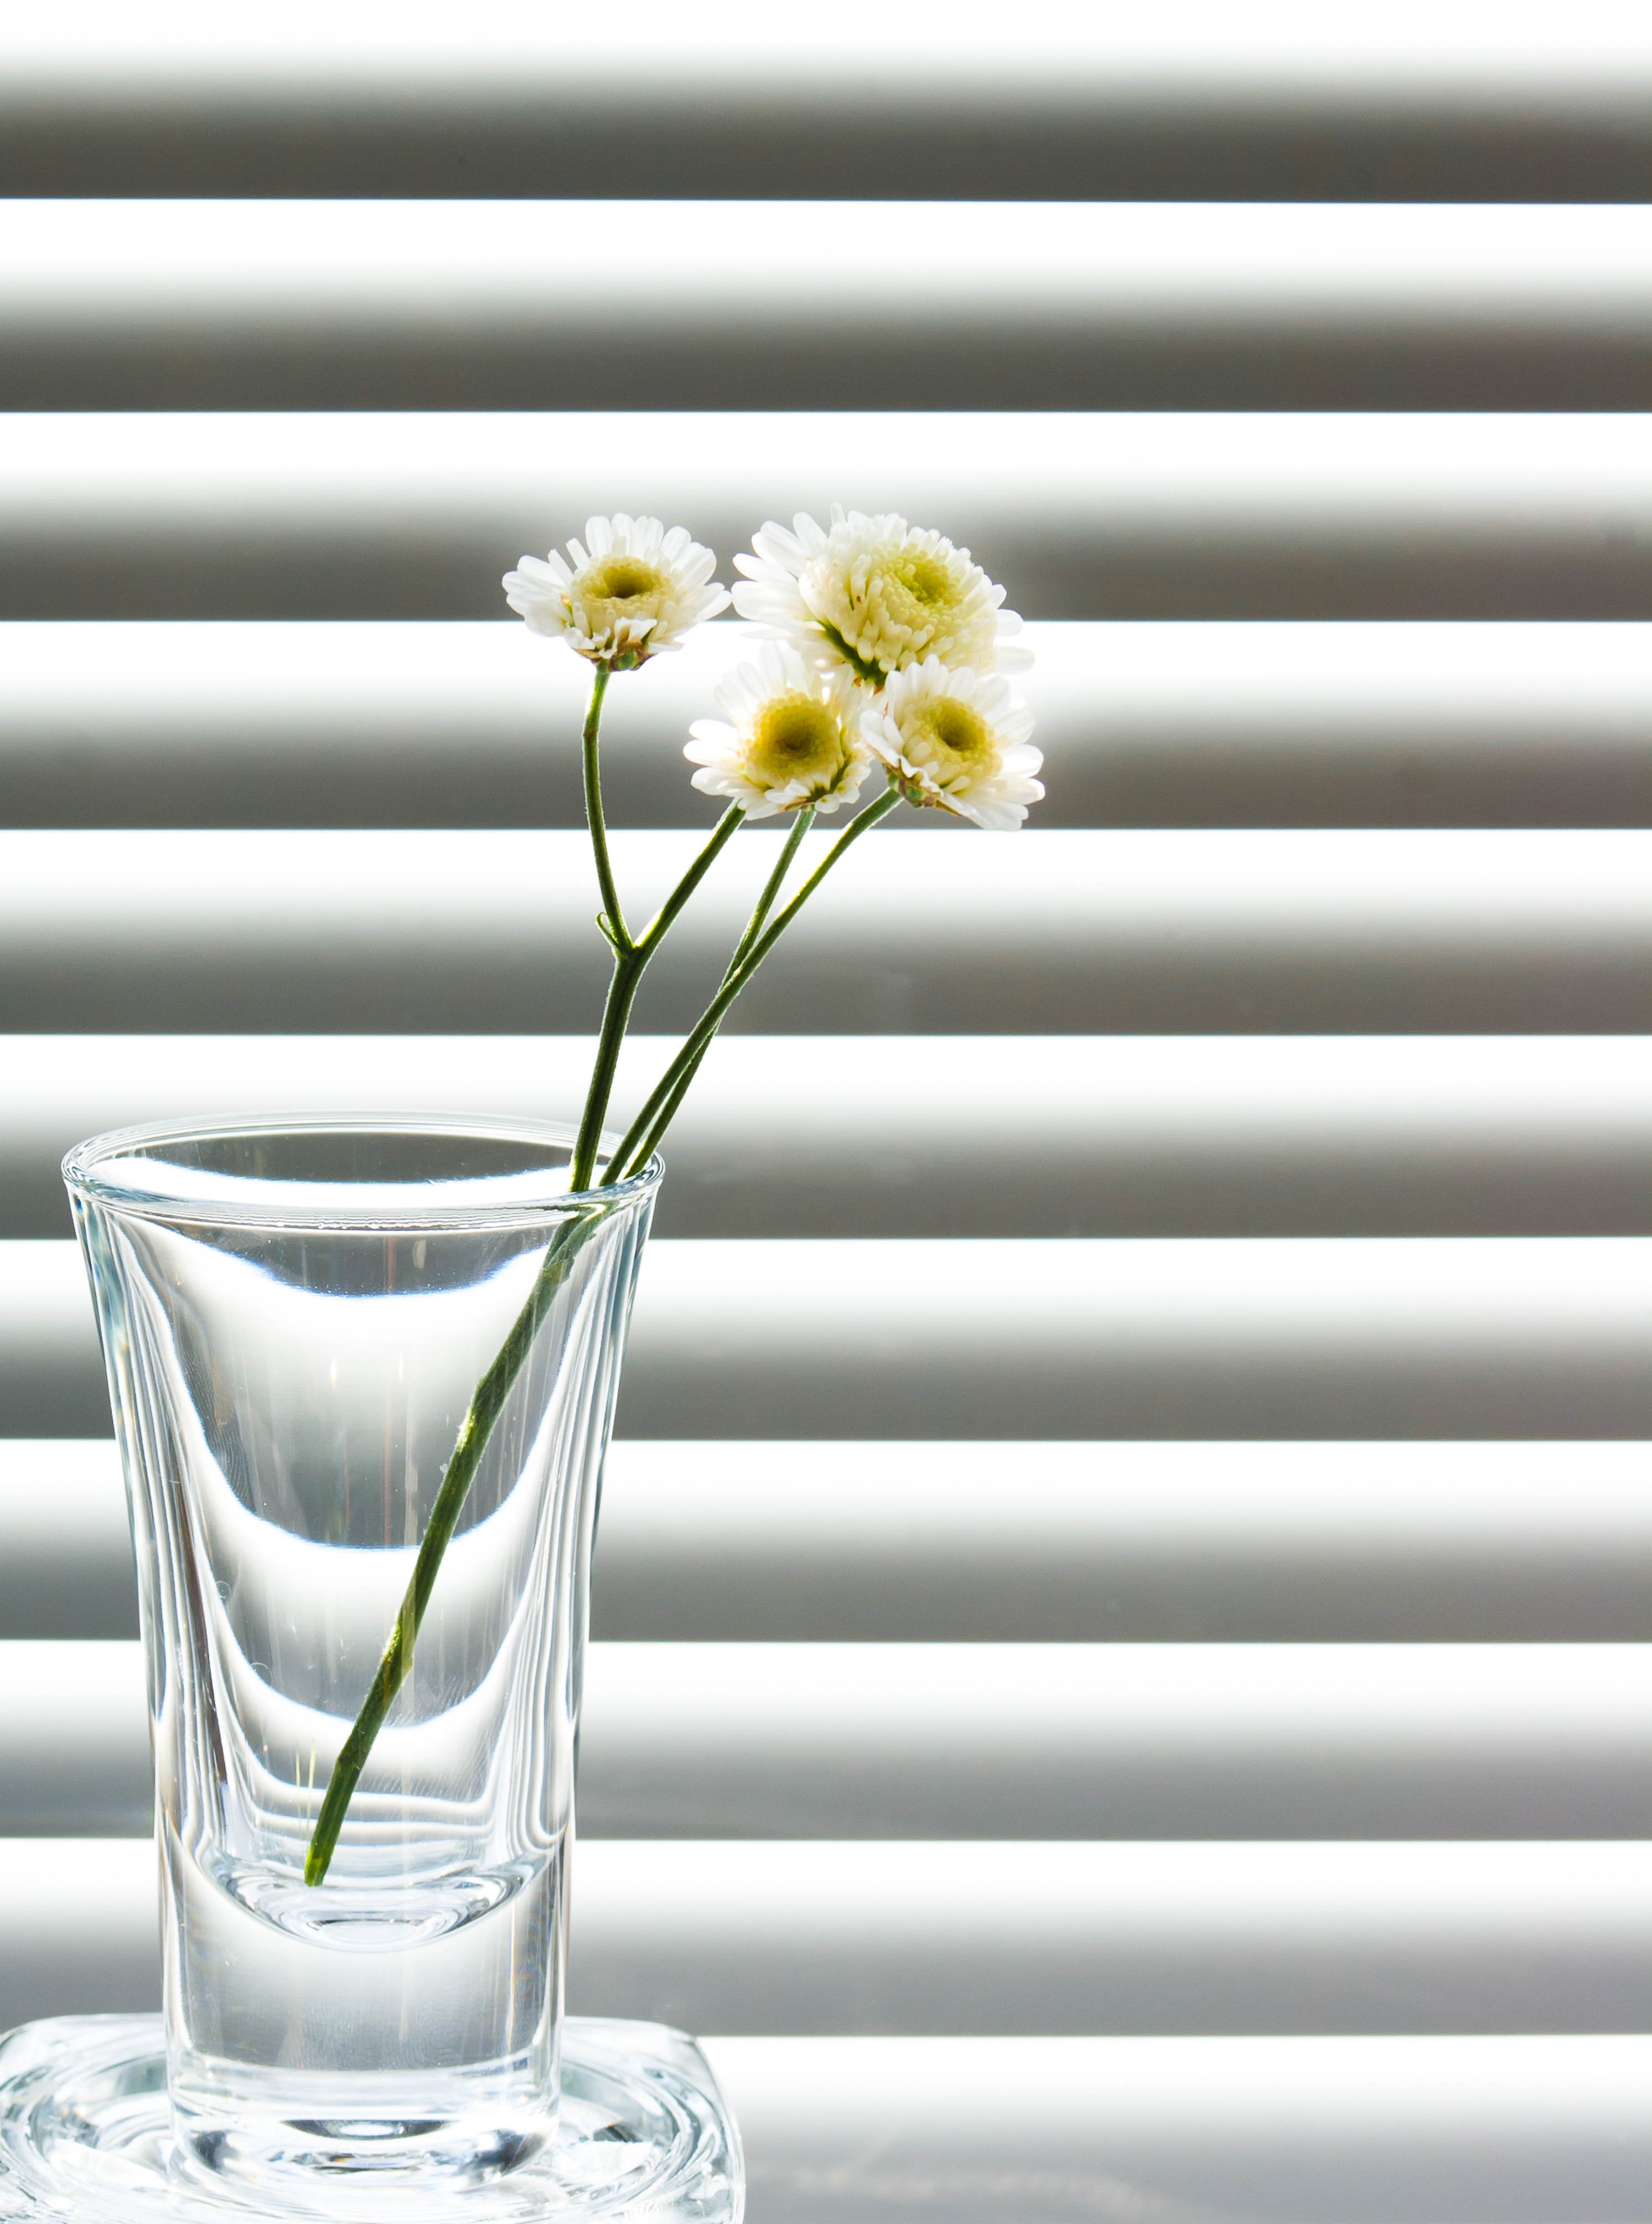 flowers in front of blinds